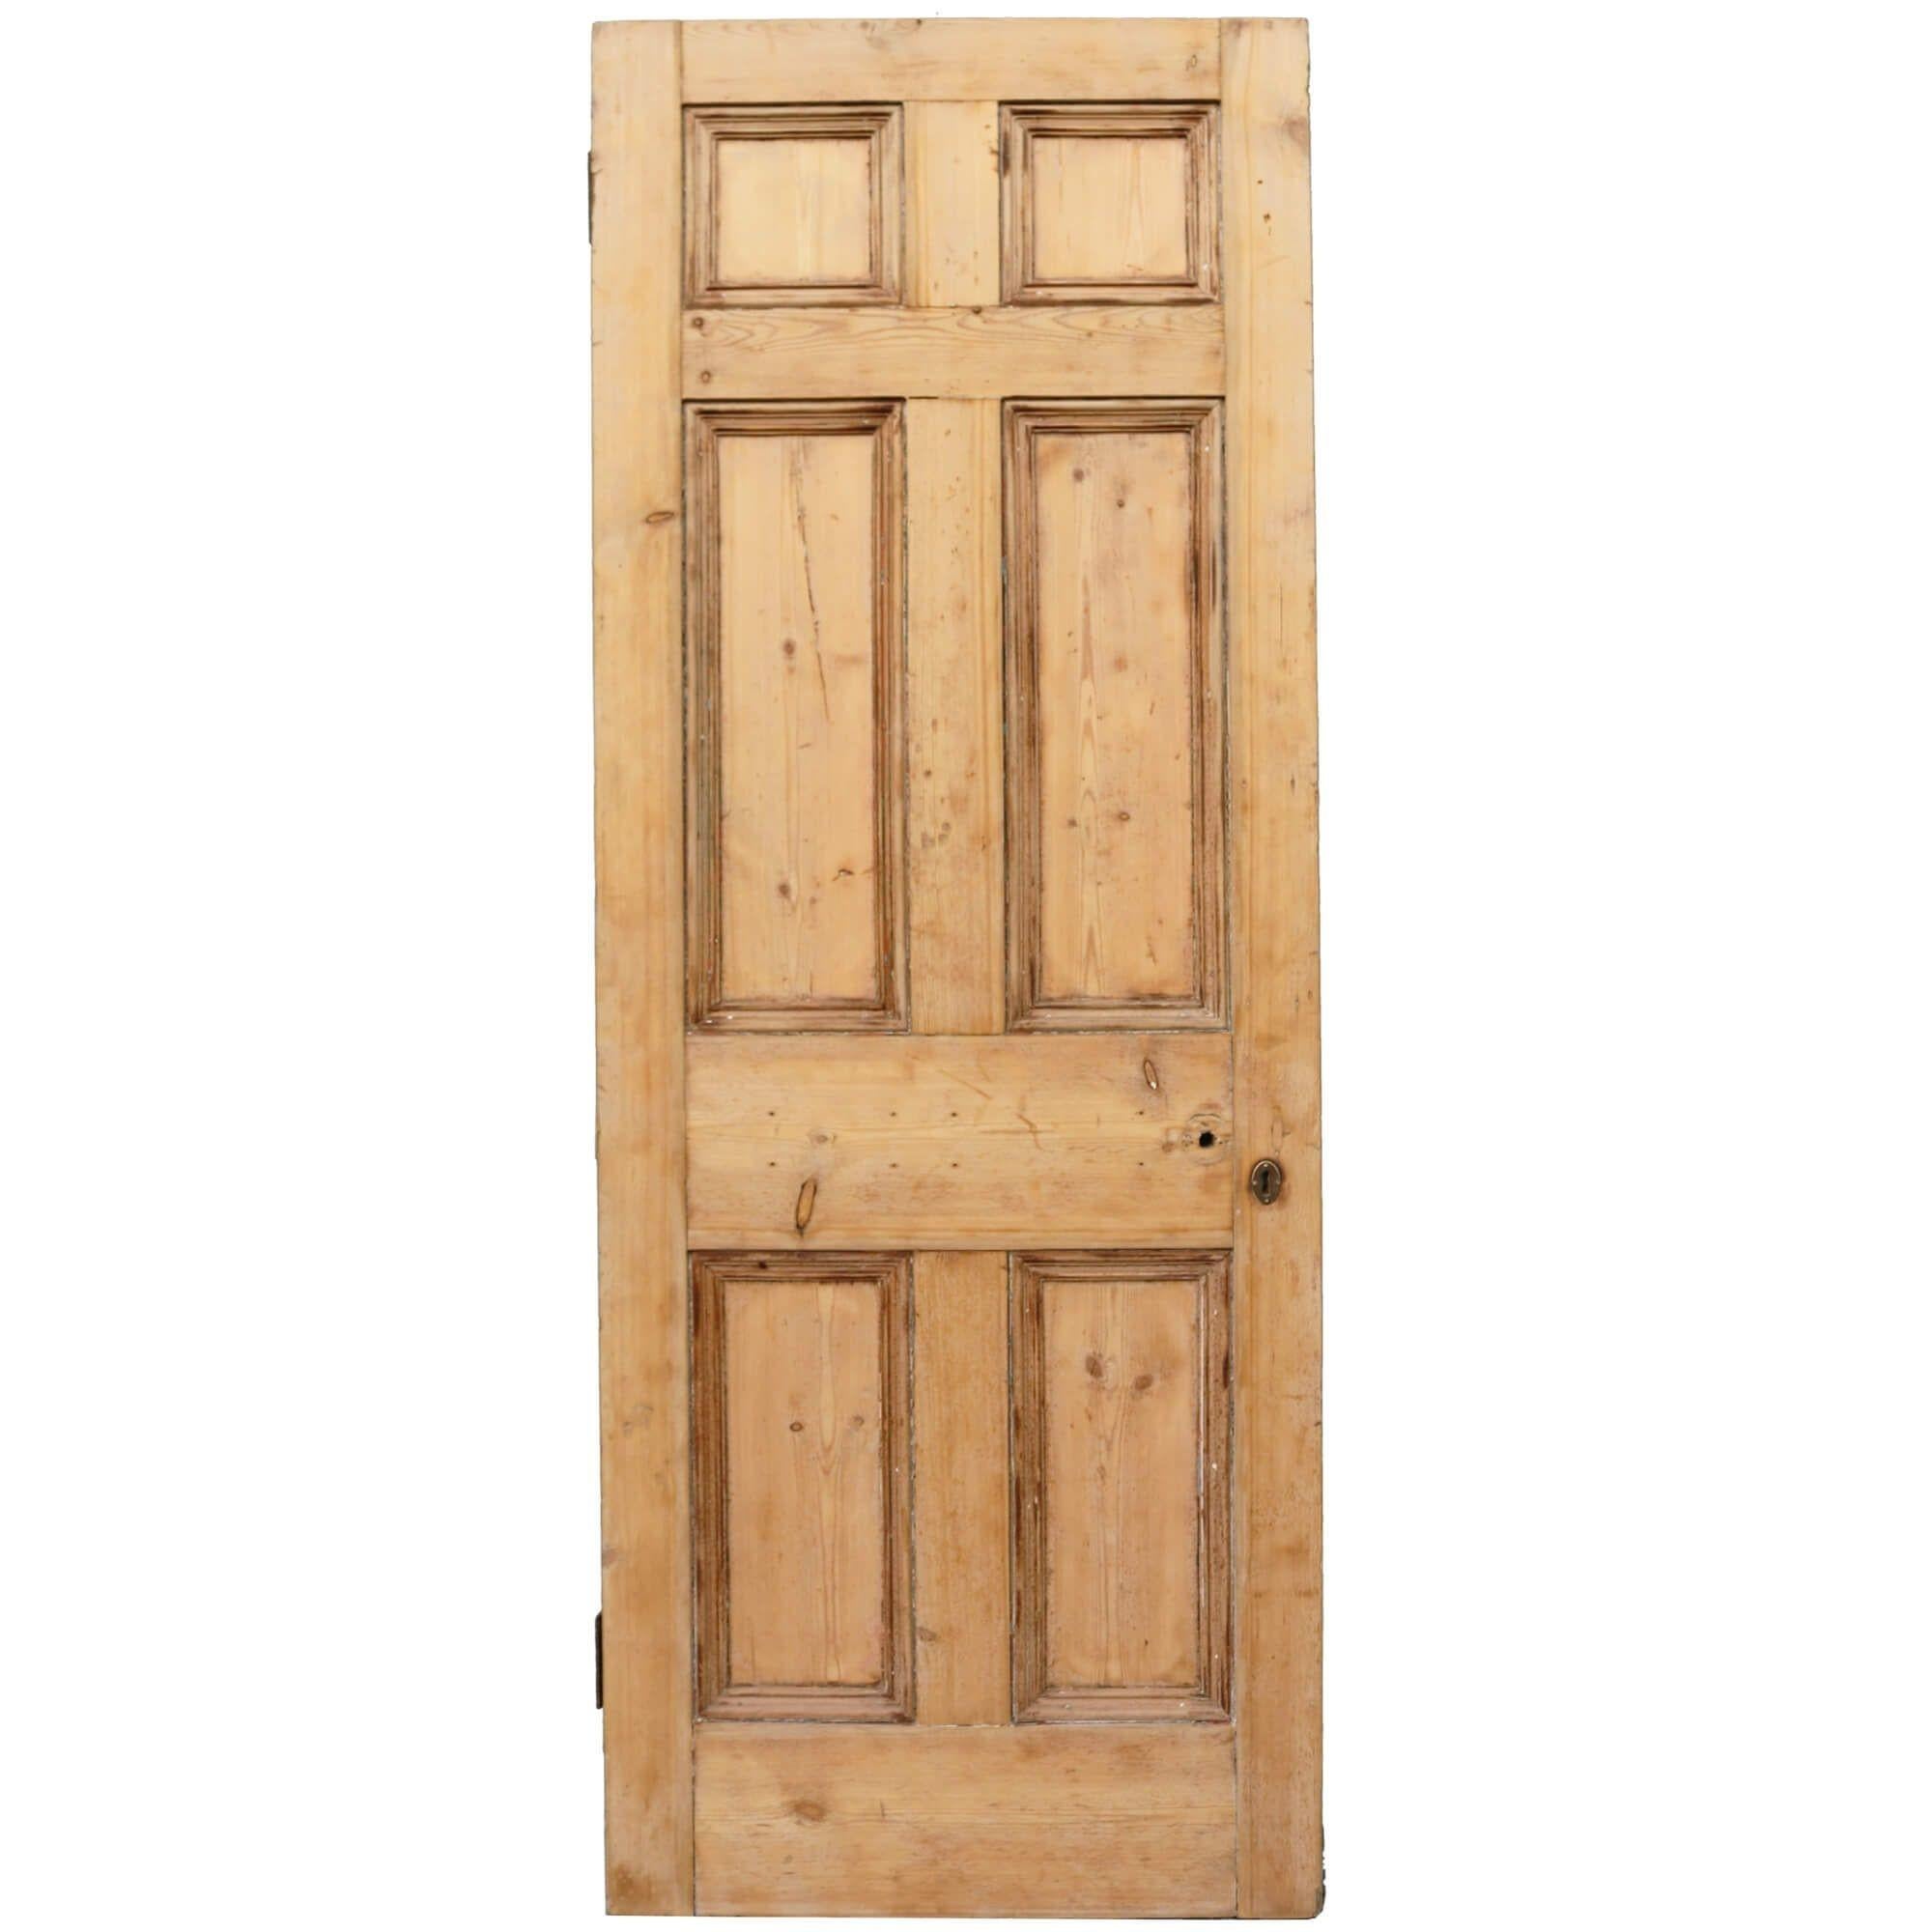 A good quality reclaimed 6-panel Victorian pine door for internal or exterior use. Dating from the 1890s, this antique door has 6 panels to each side, constructed in different styles on either side (see photos). Made in pine, this reclaimed door is